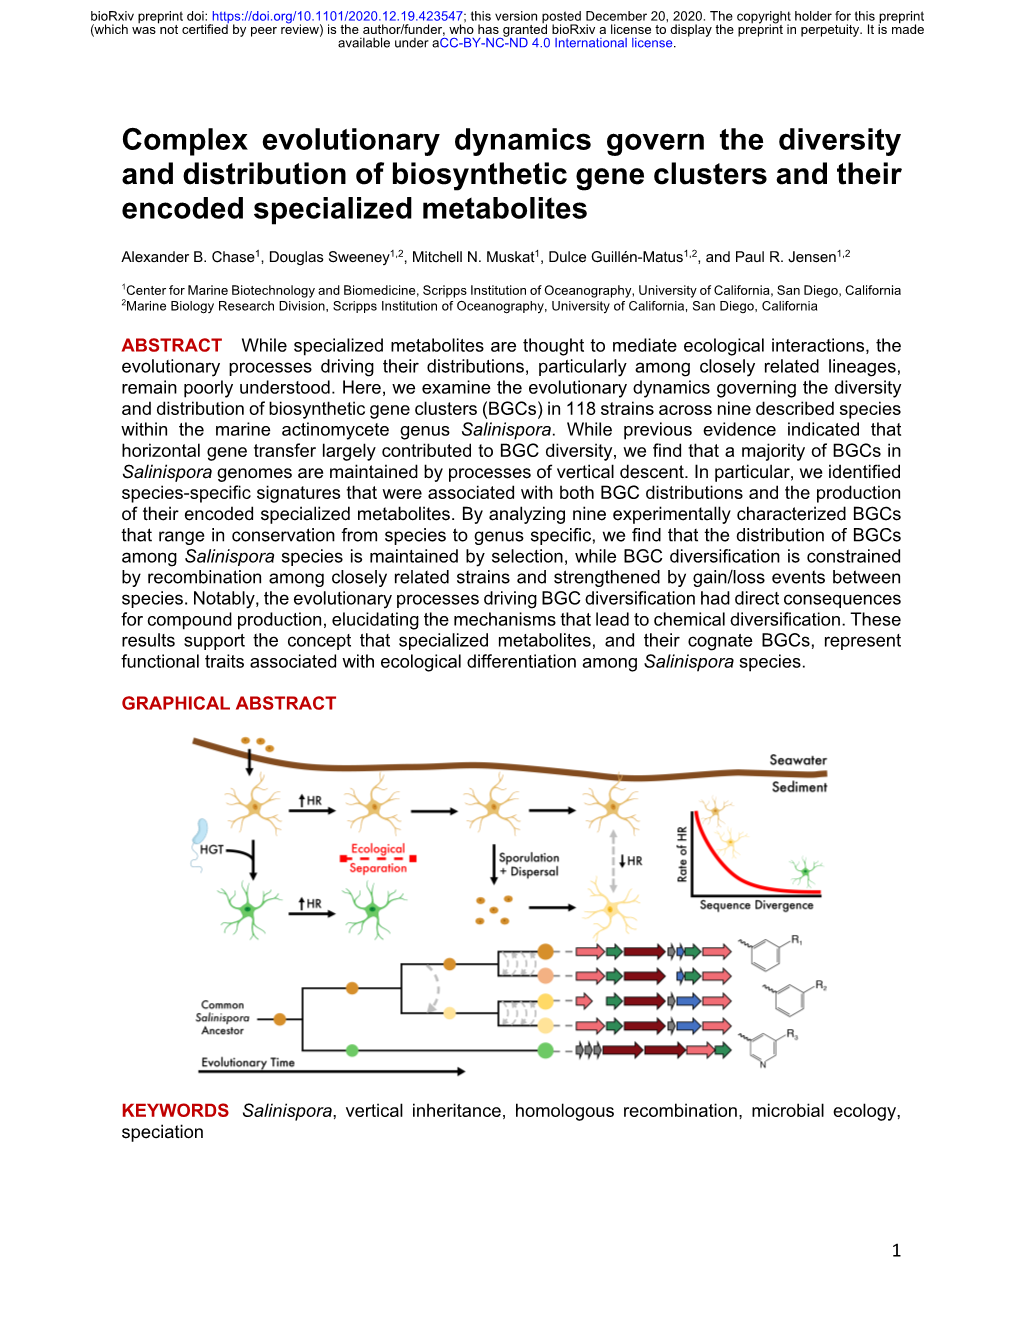 Complex Evolutionary Dynamics Govern the Diversity and Distribution of Biosynthetic Gene Clusters and Their Encoded Specialized Metabolites